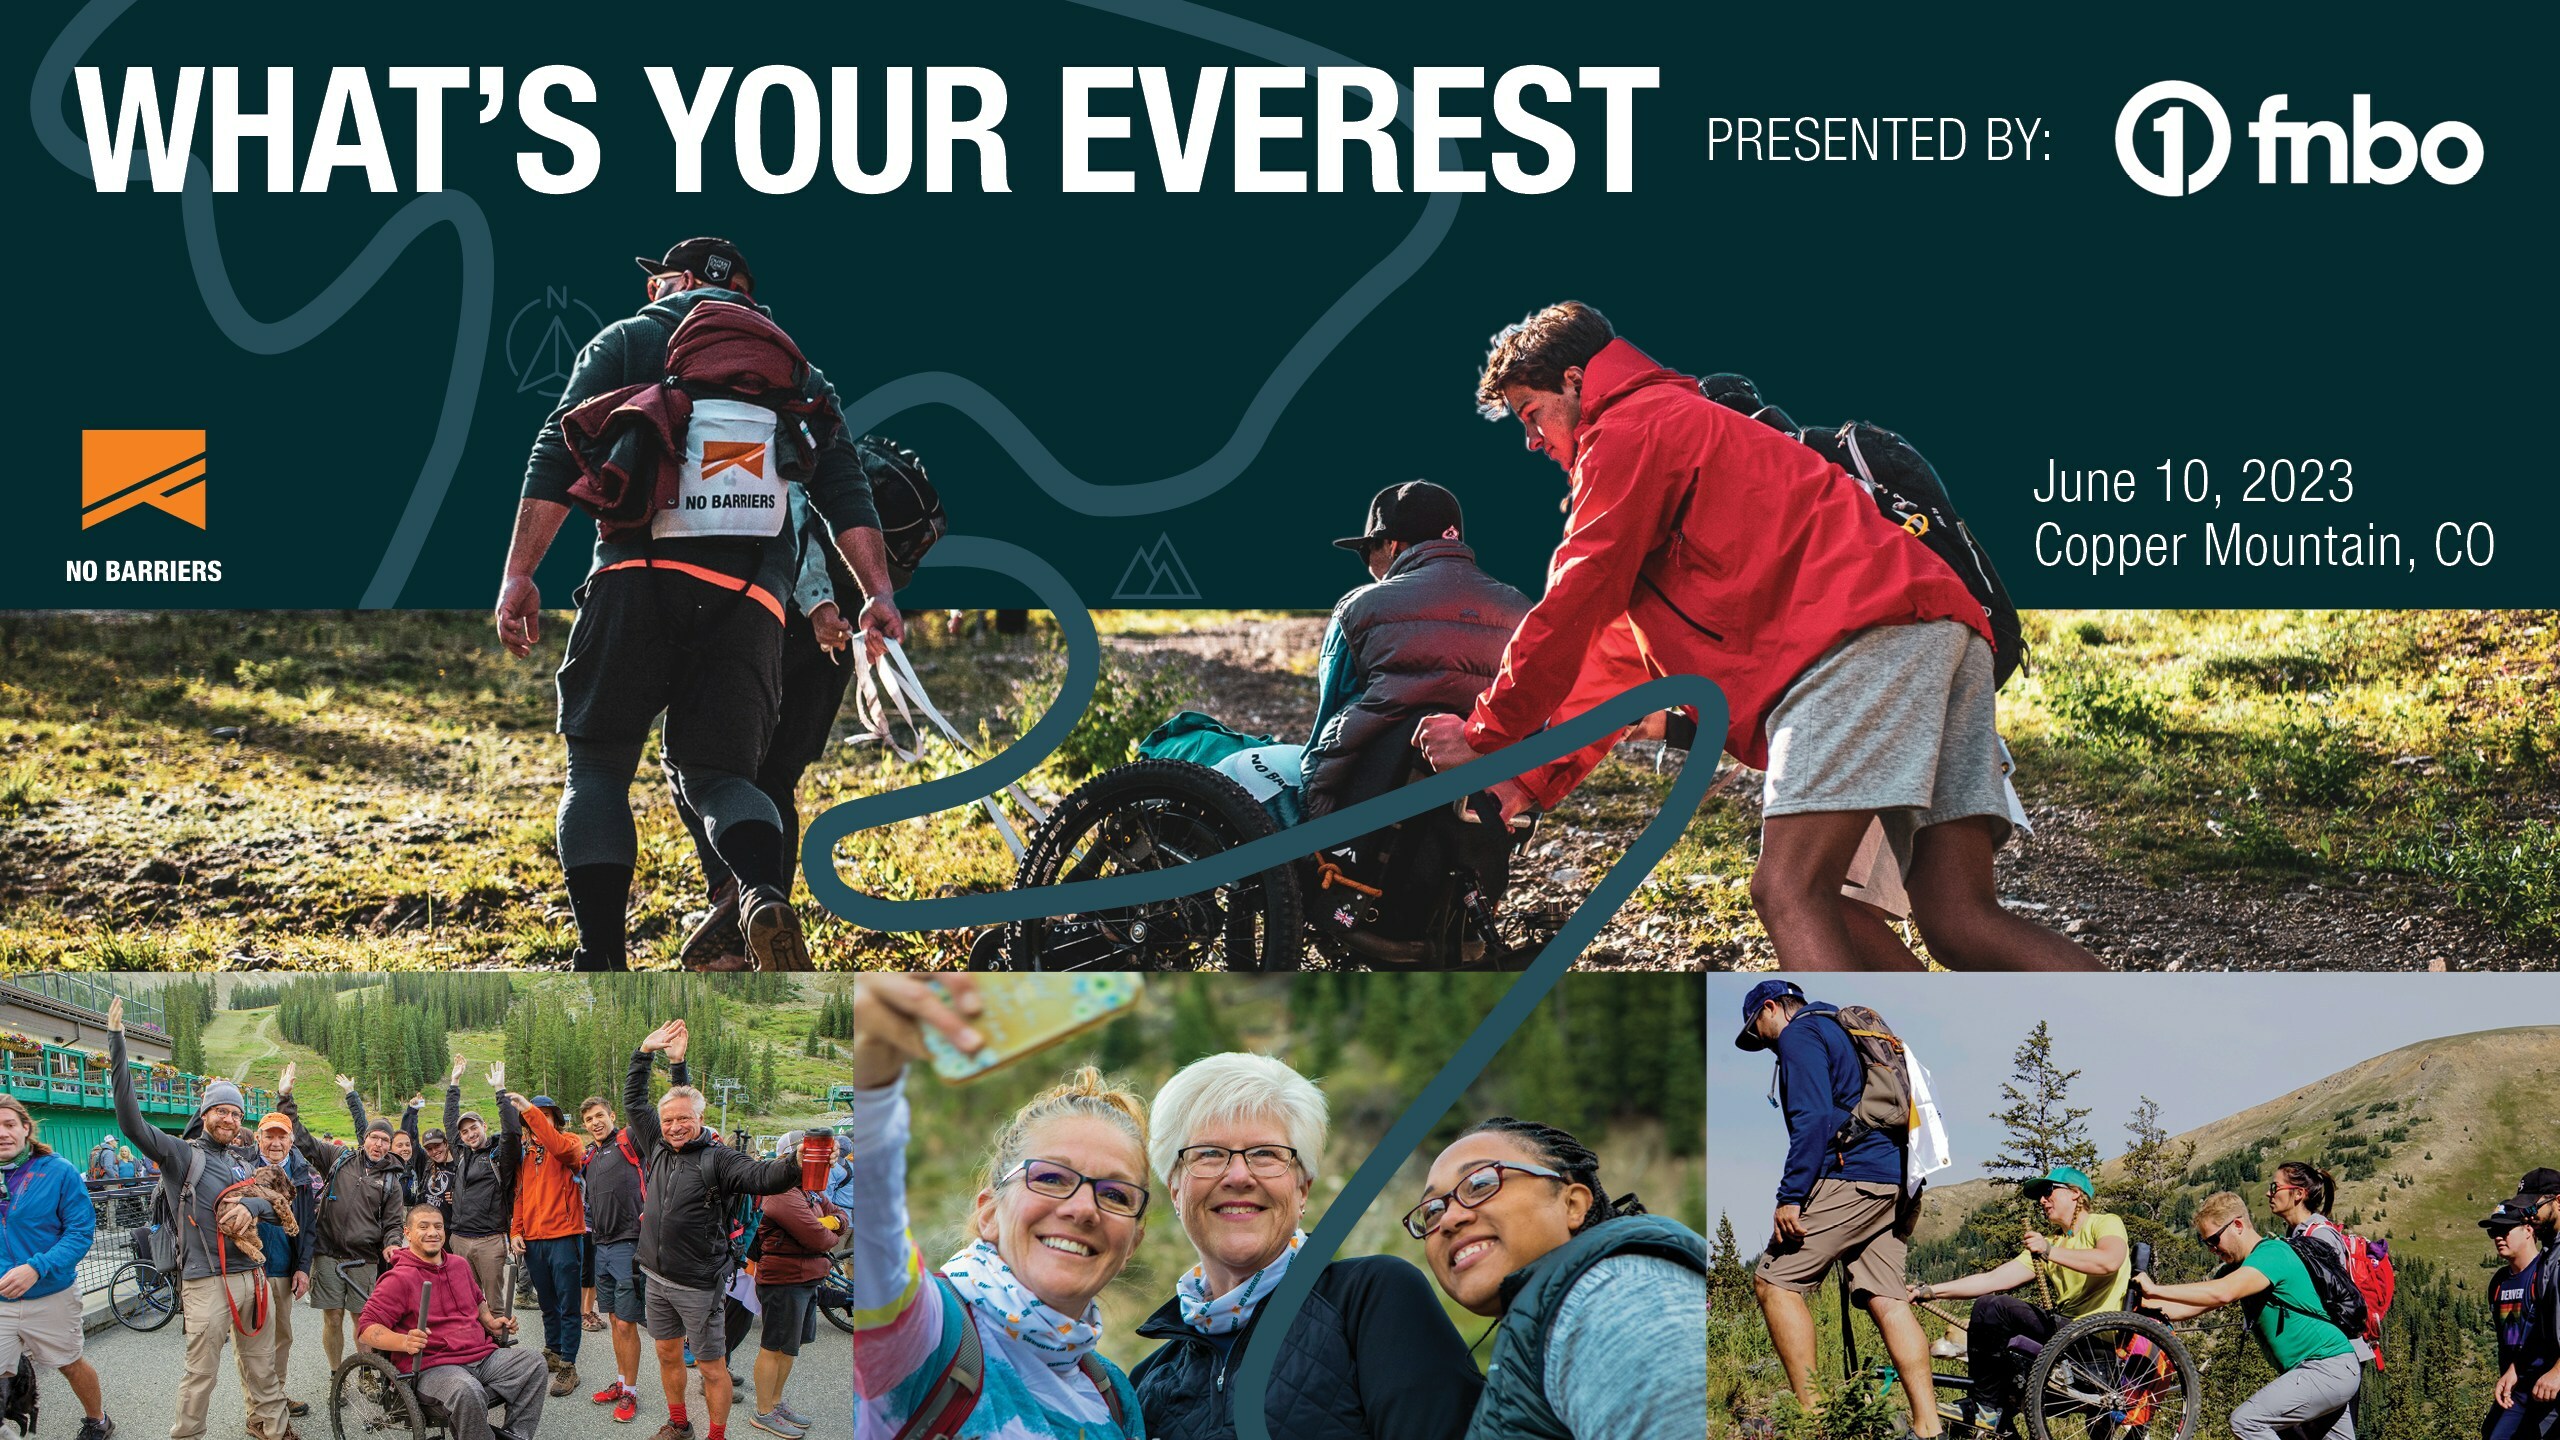 No Barriers What's Your Everest presented by FNBO is a community hike welcoming individuals of all ages, abilities and backgrounds. In addition to experiencing team building and the power of breaking barriers, participants fundraise to support the No Barriers mission, impacting the lives of sidelined communities. Registration is now open!